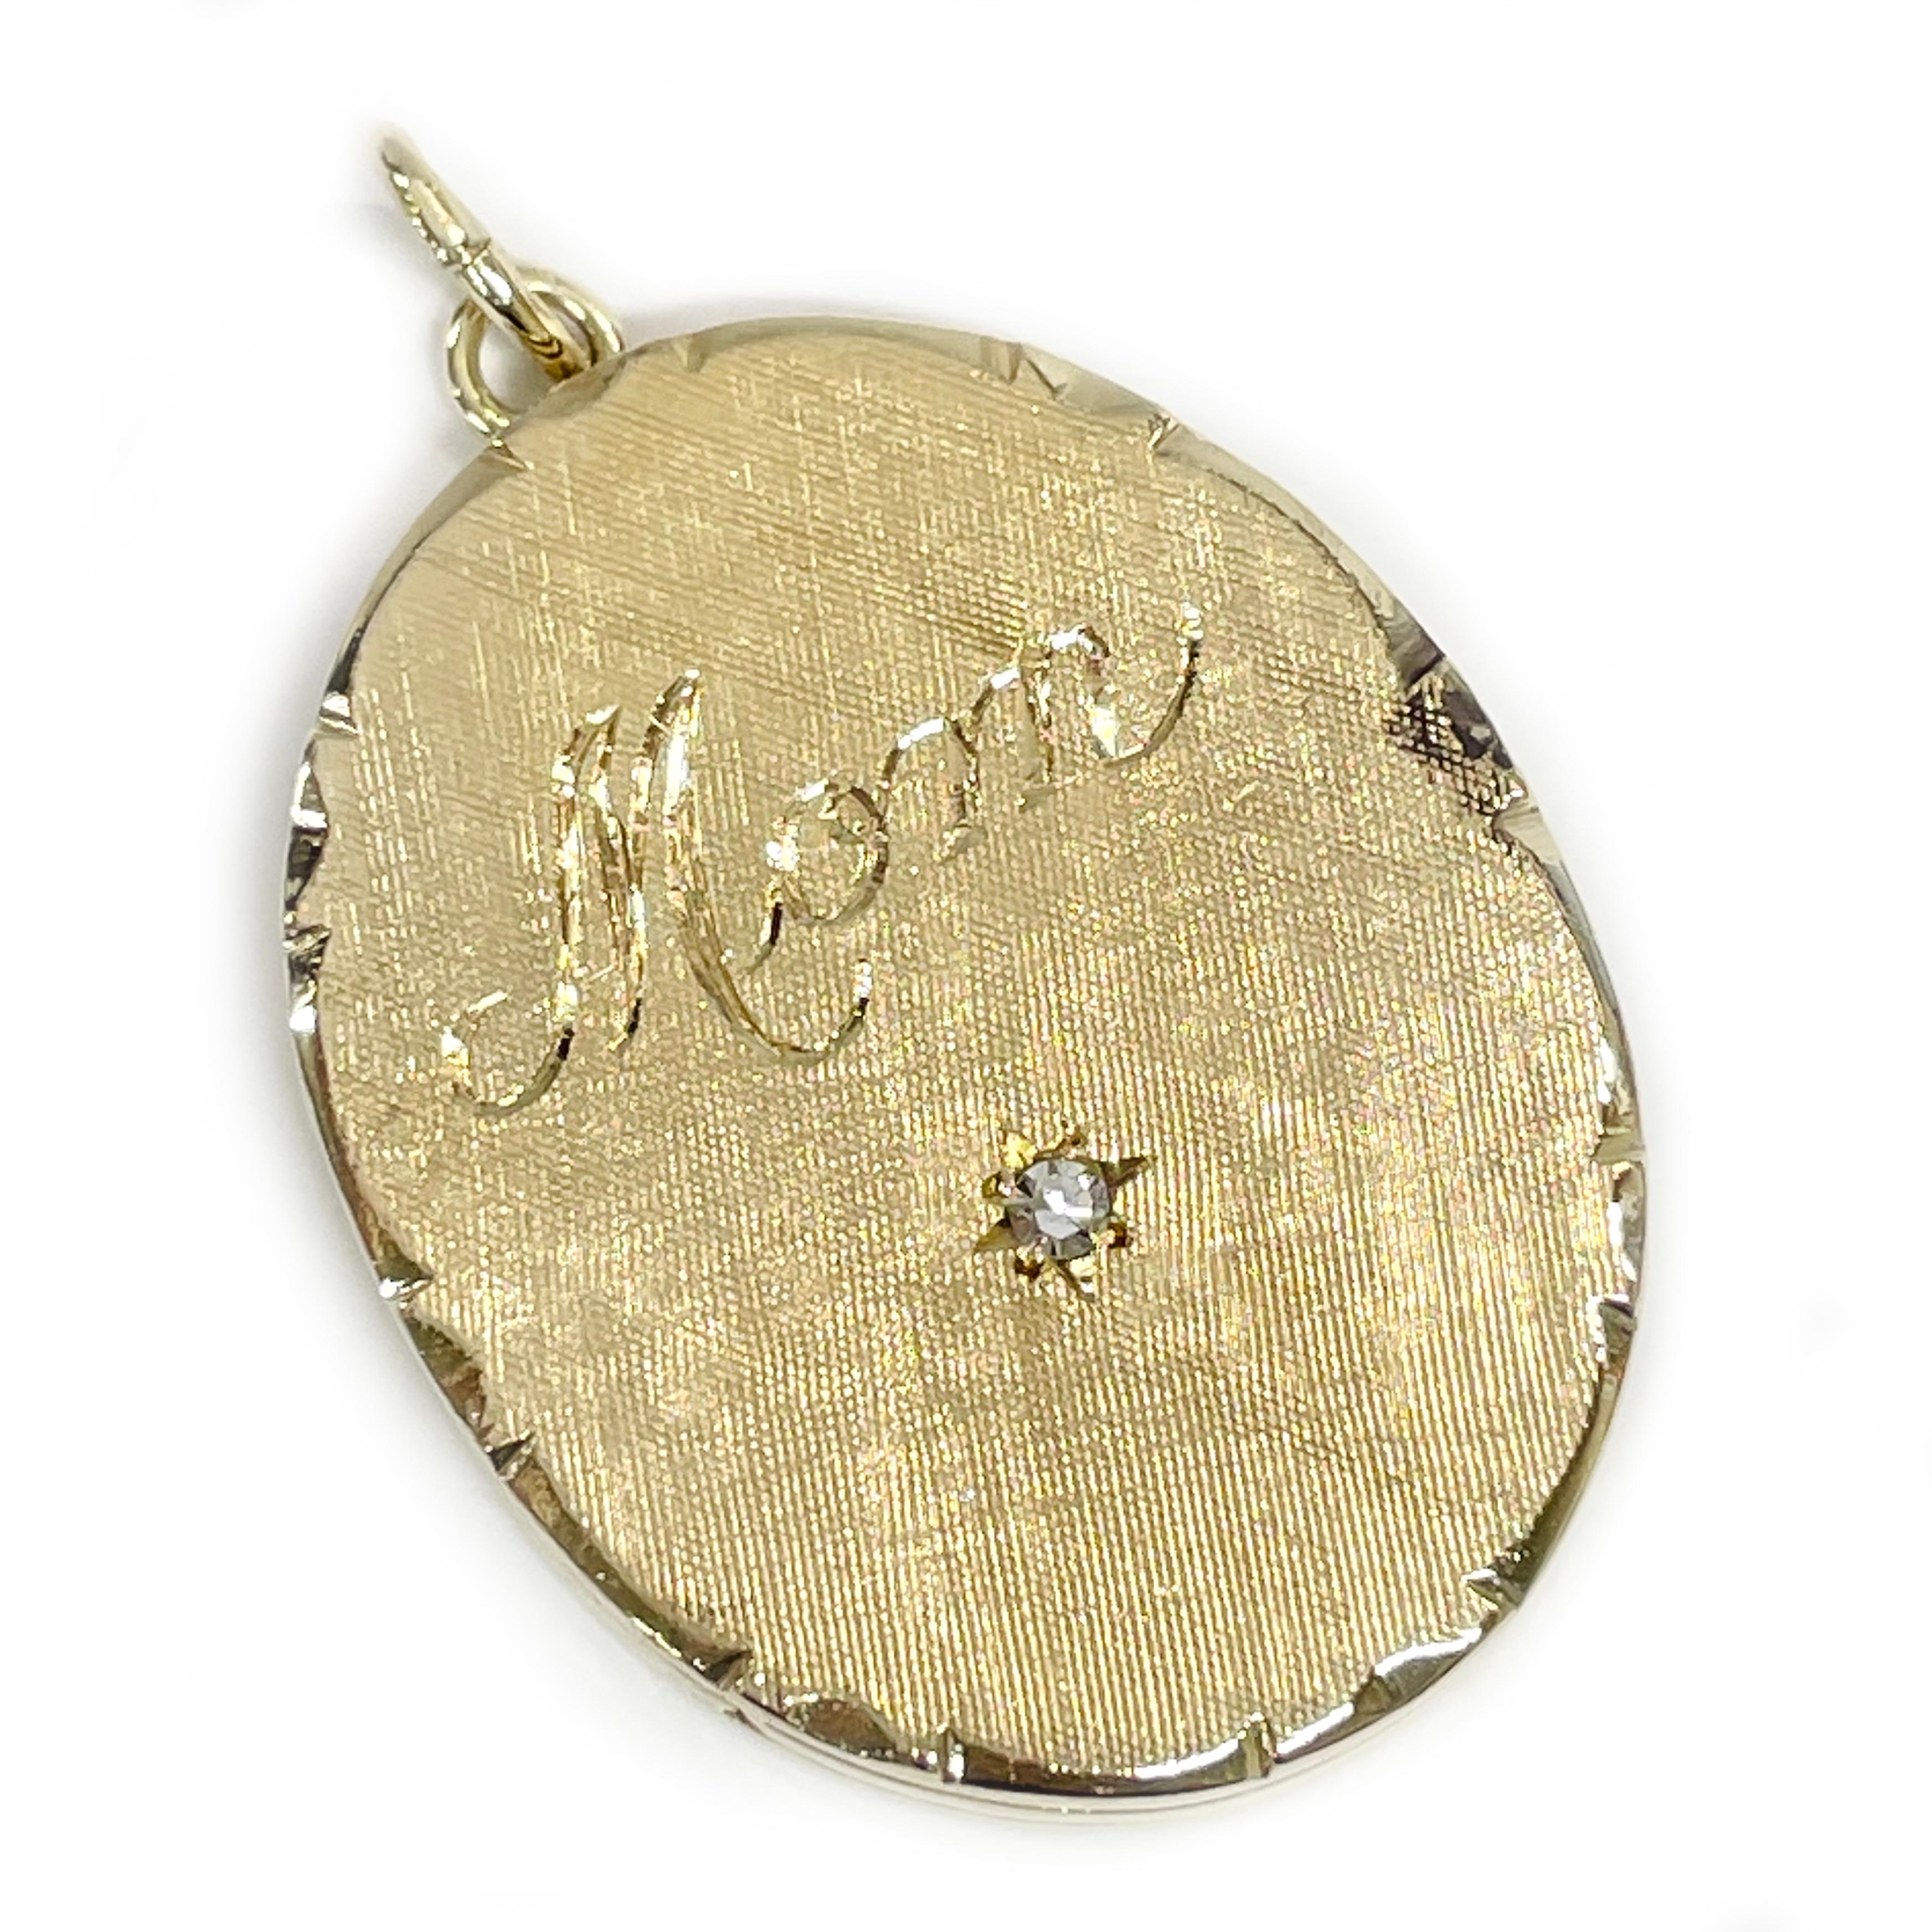 14 Karat Yellow Gold Hinged Diamond Locket Pendant. The front of the oval pendant have a Florentine finish with the word Mom engraved in a cursive font with a starburst cut and a round diamond set in the starburst. The pendant has an overall smooth